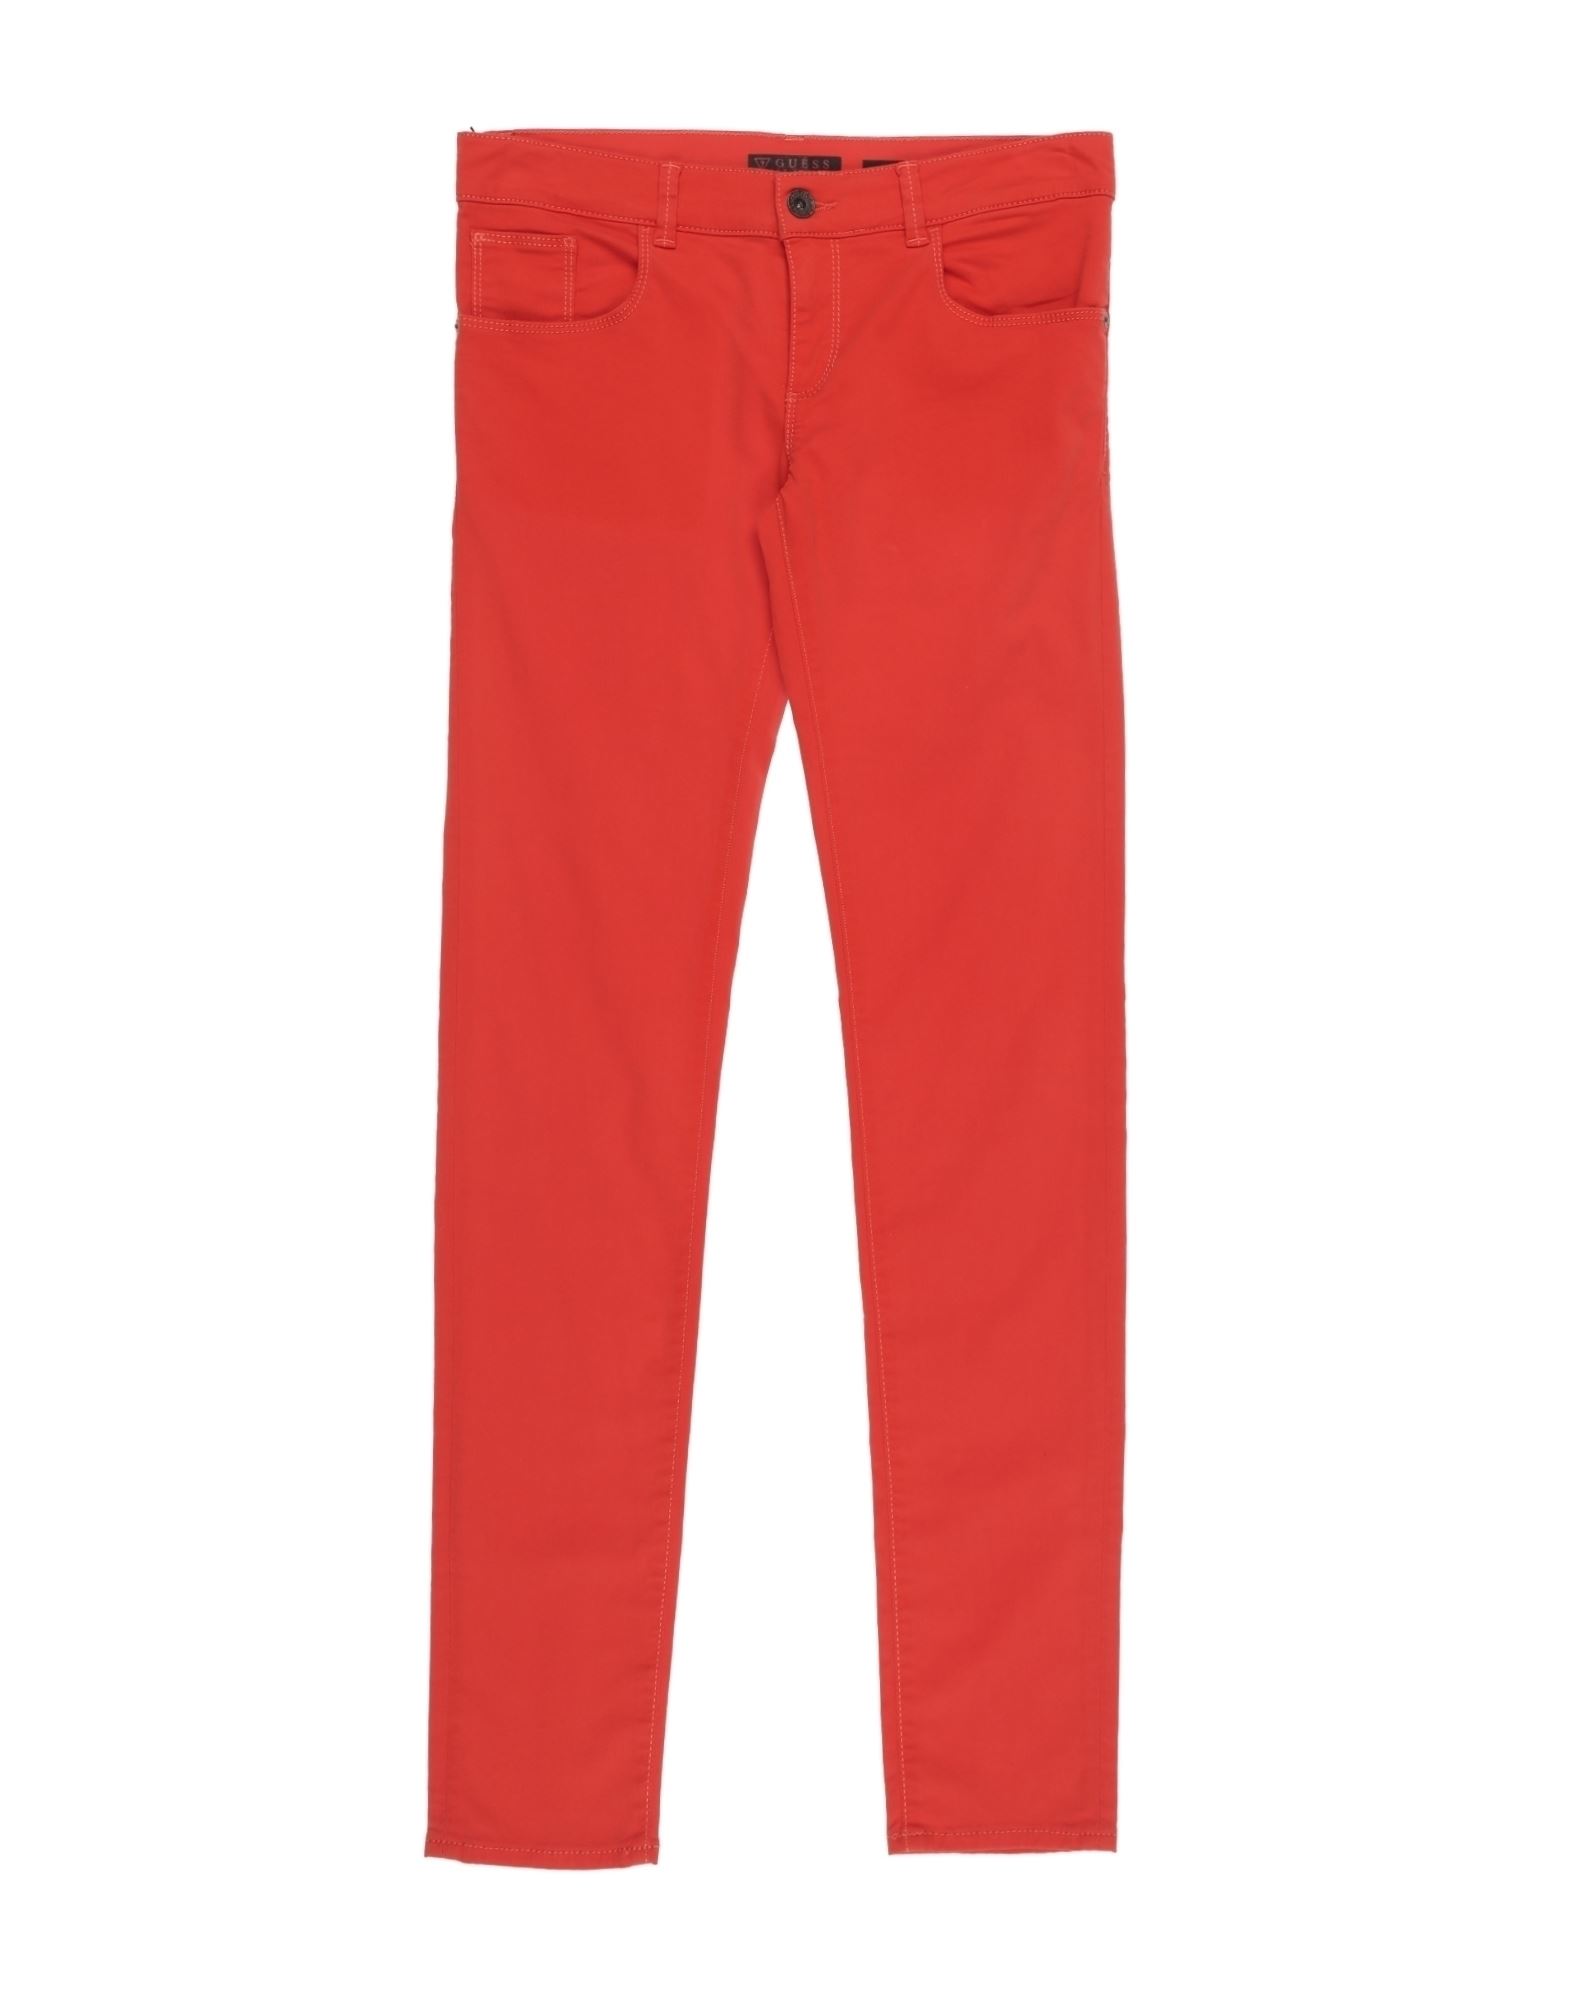 GUESS Hose Kinder Tomatenrot von GUESS